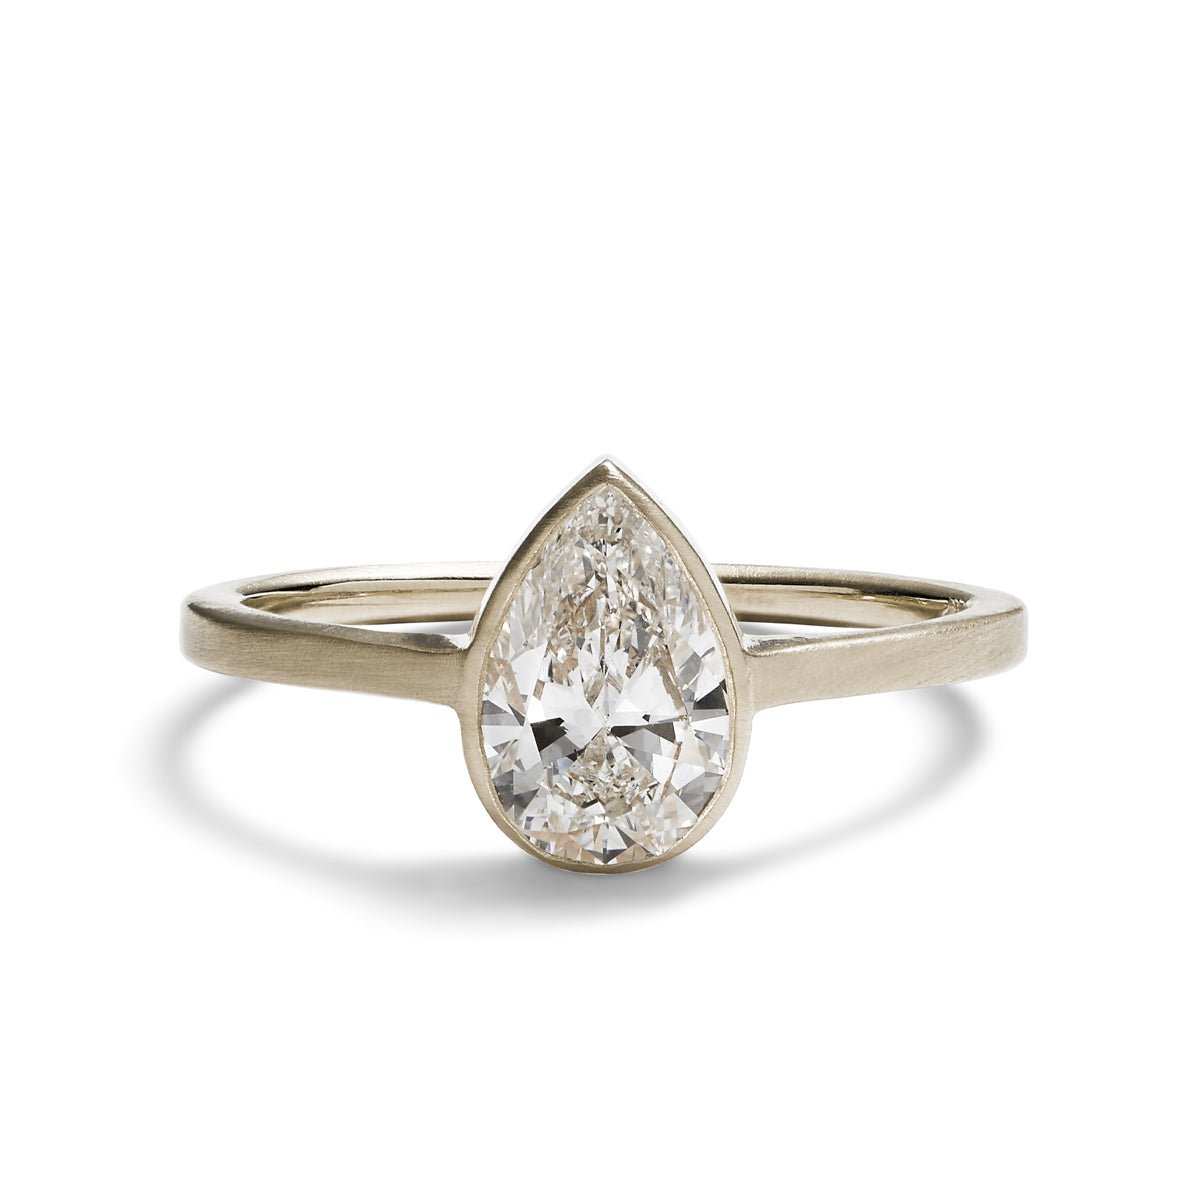 Modern pear shaped Votum ring from Betsy & Iya. With a 14K white gold band and lab-grown diamond (1 ct).